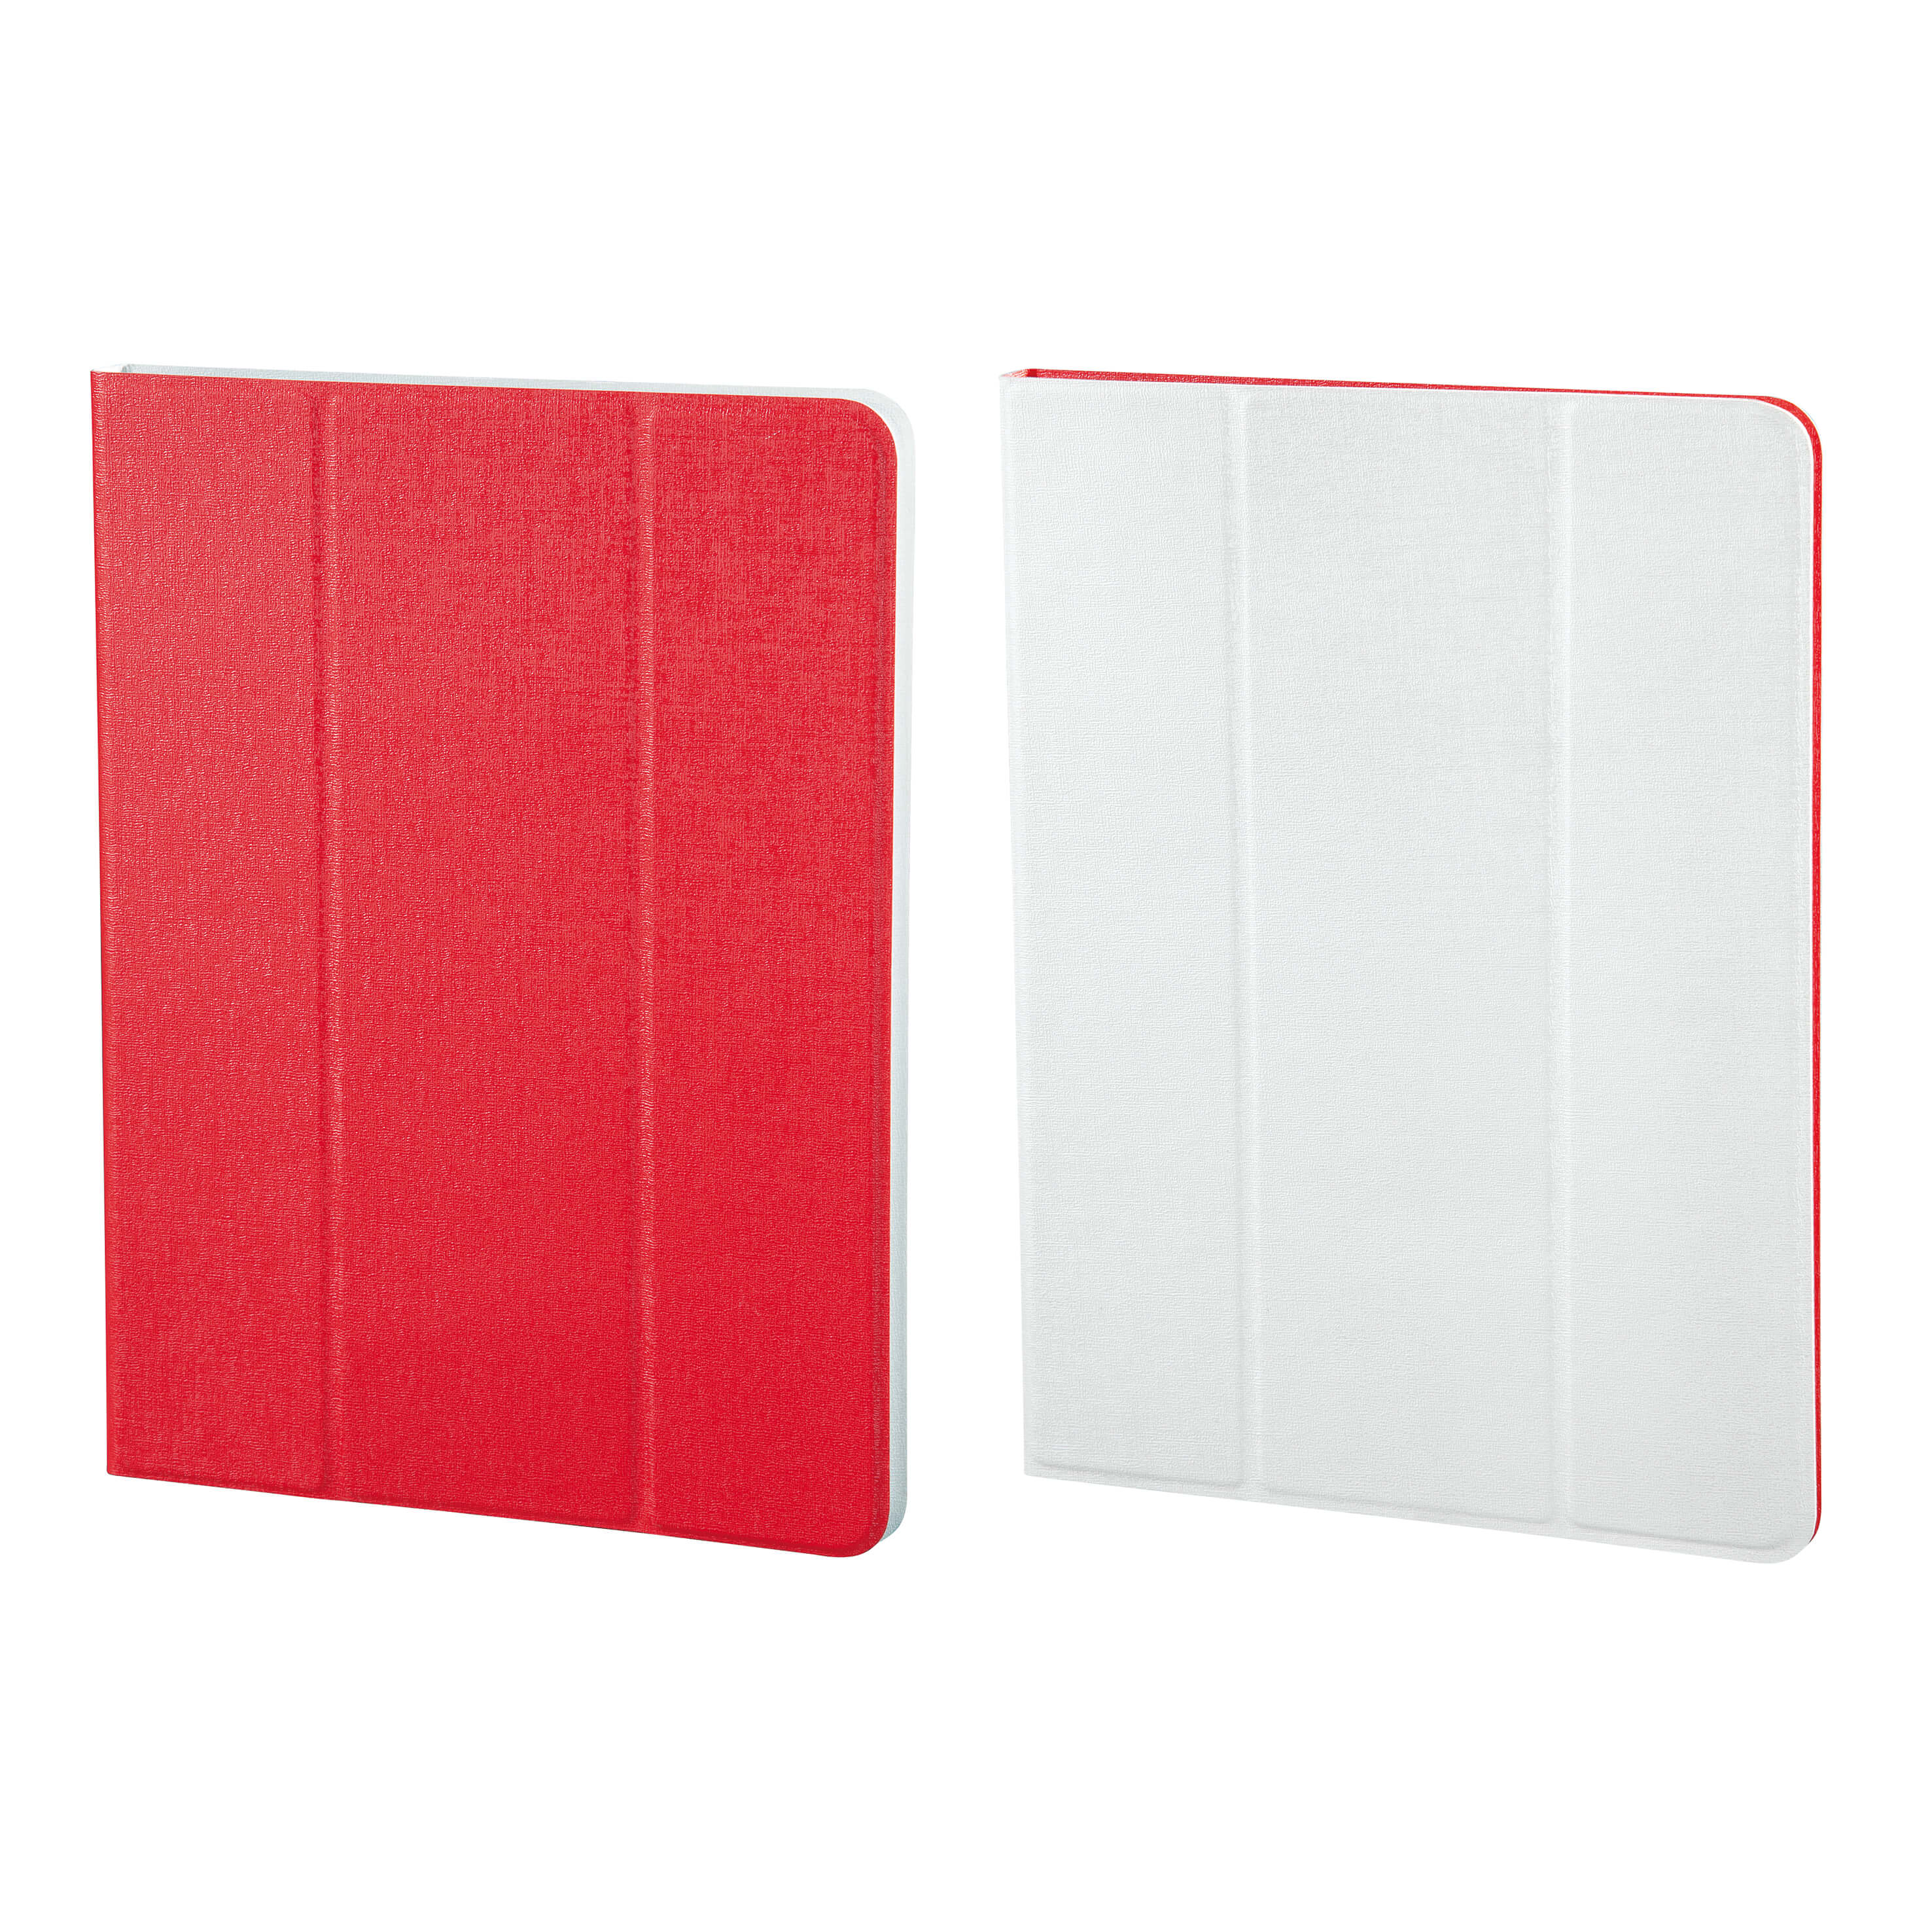 TwoTone Portfolio for all tab lets up to 17.8 cm (7), red/wh